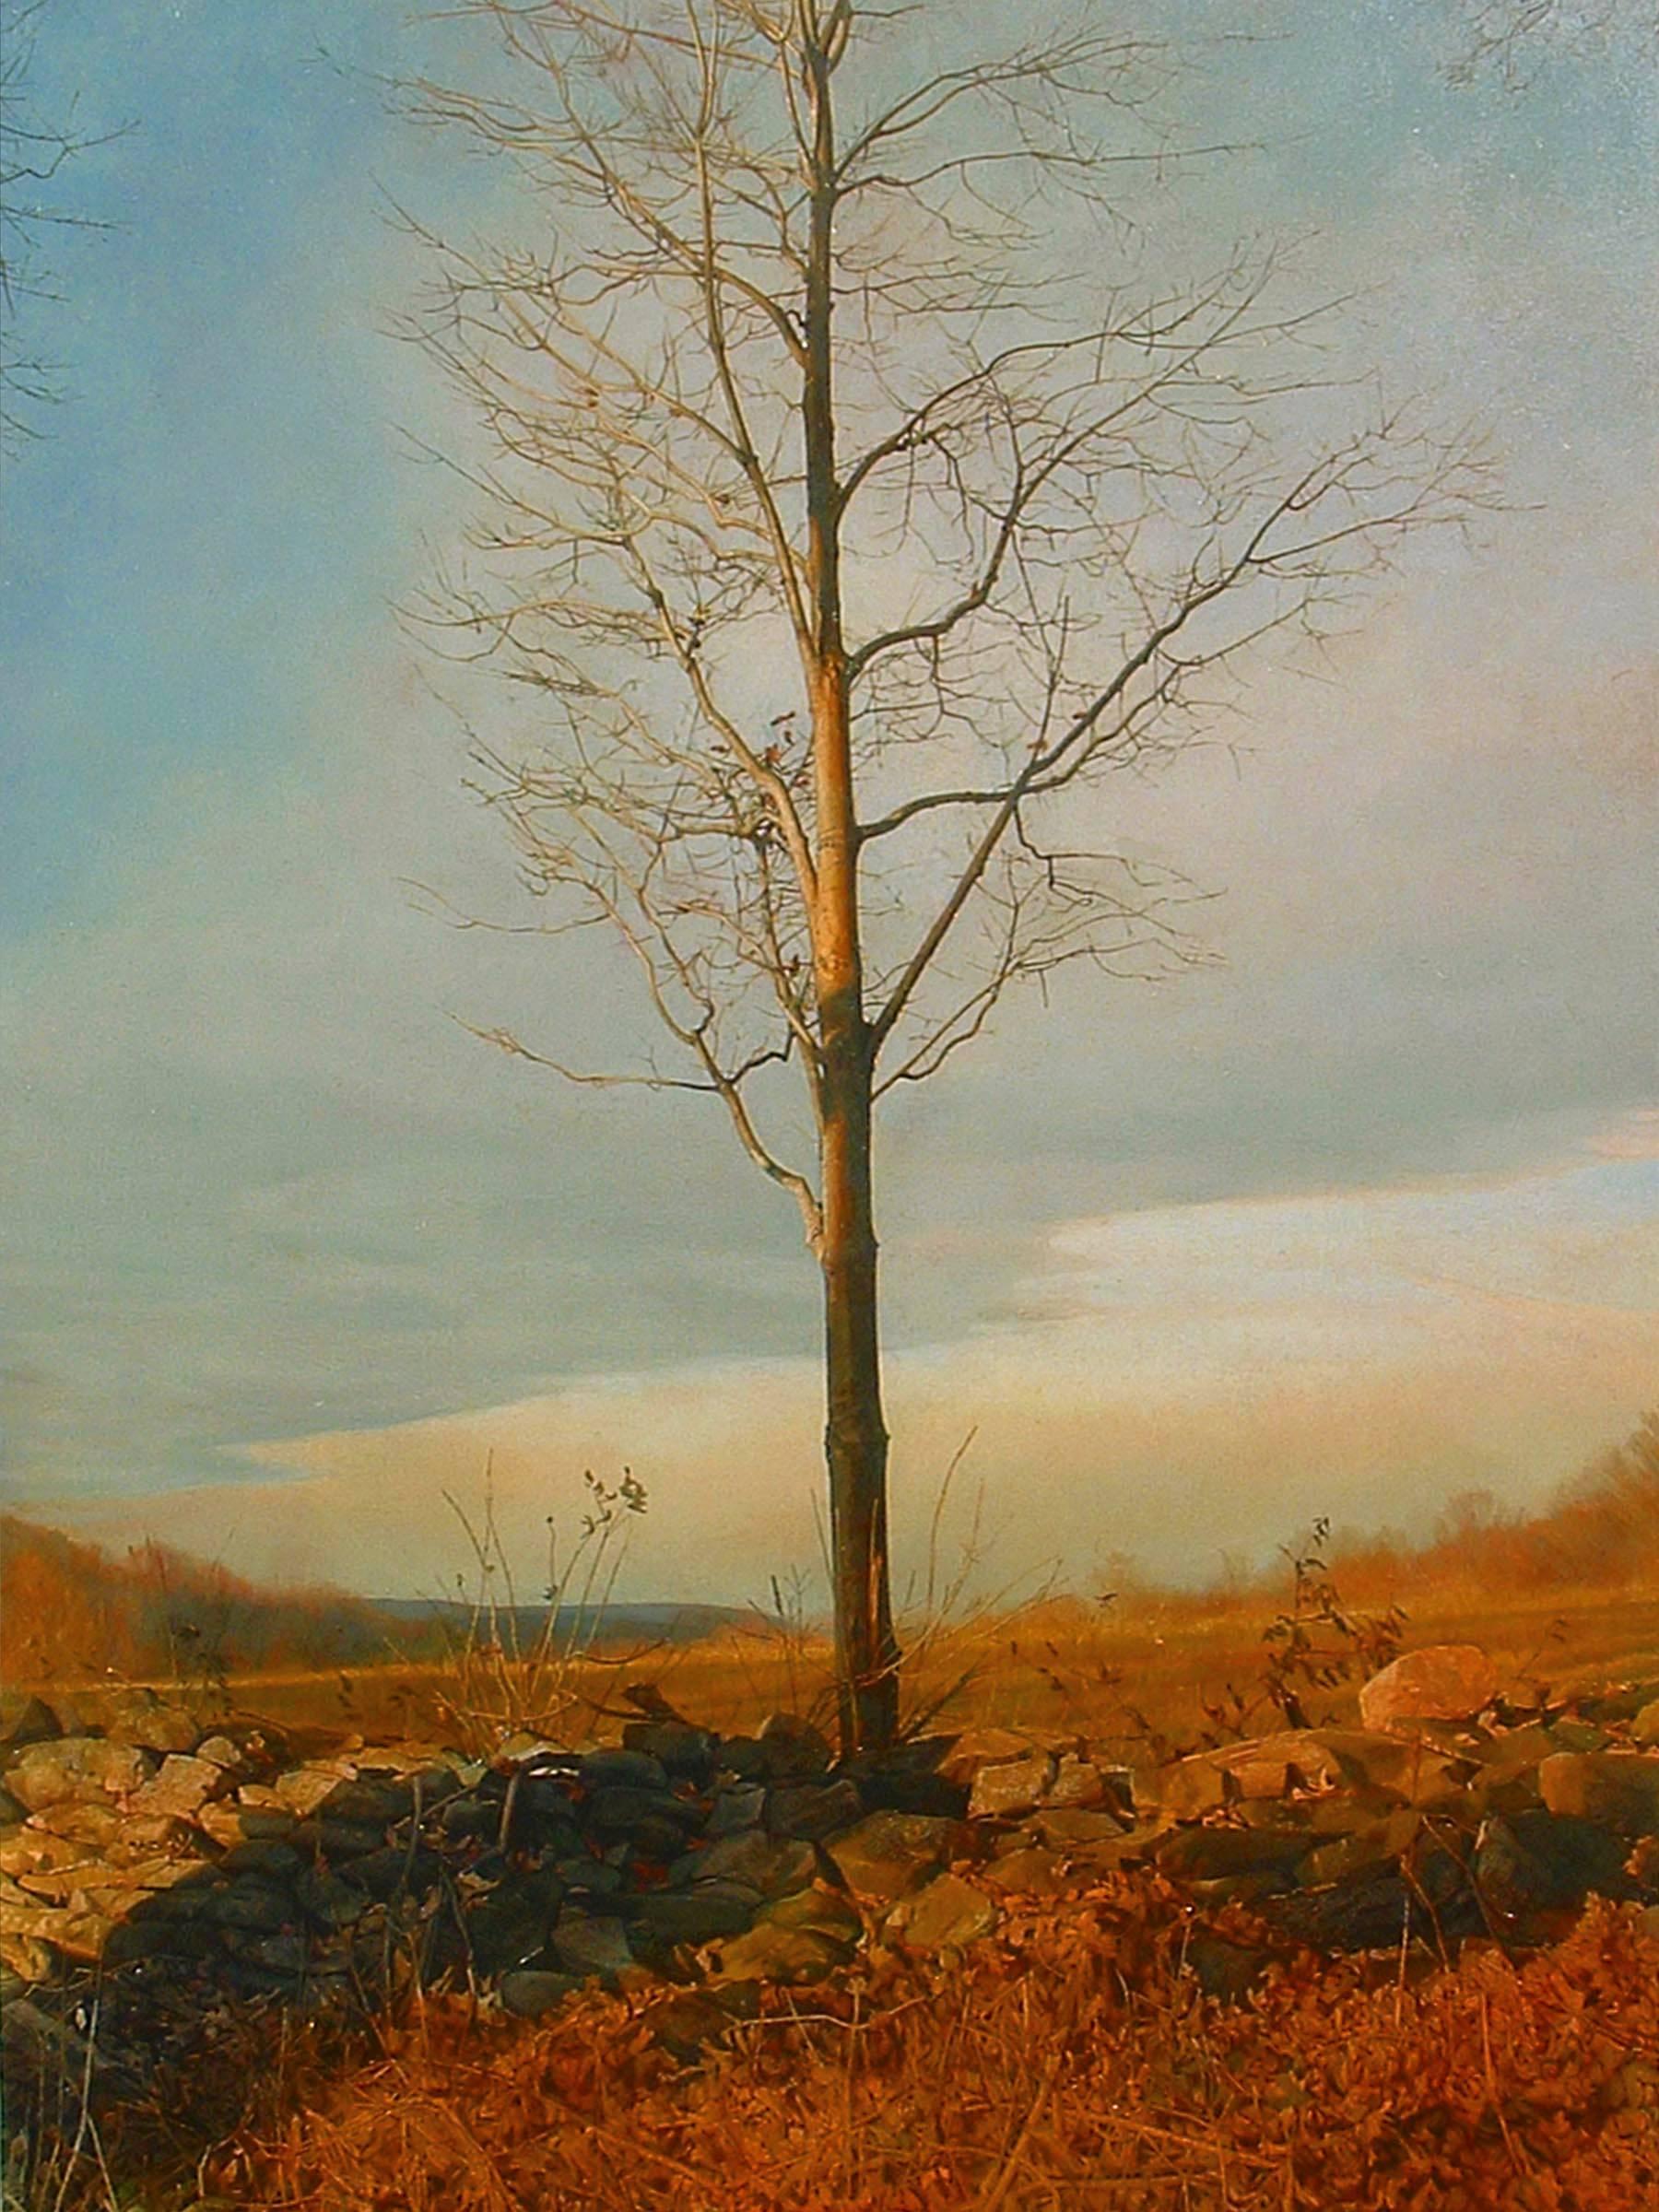 Trey Friedman Landscape Painting - TREES ON A LINE #53A, photo-realism, tree, field, country landscape